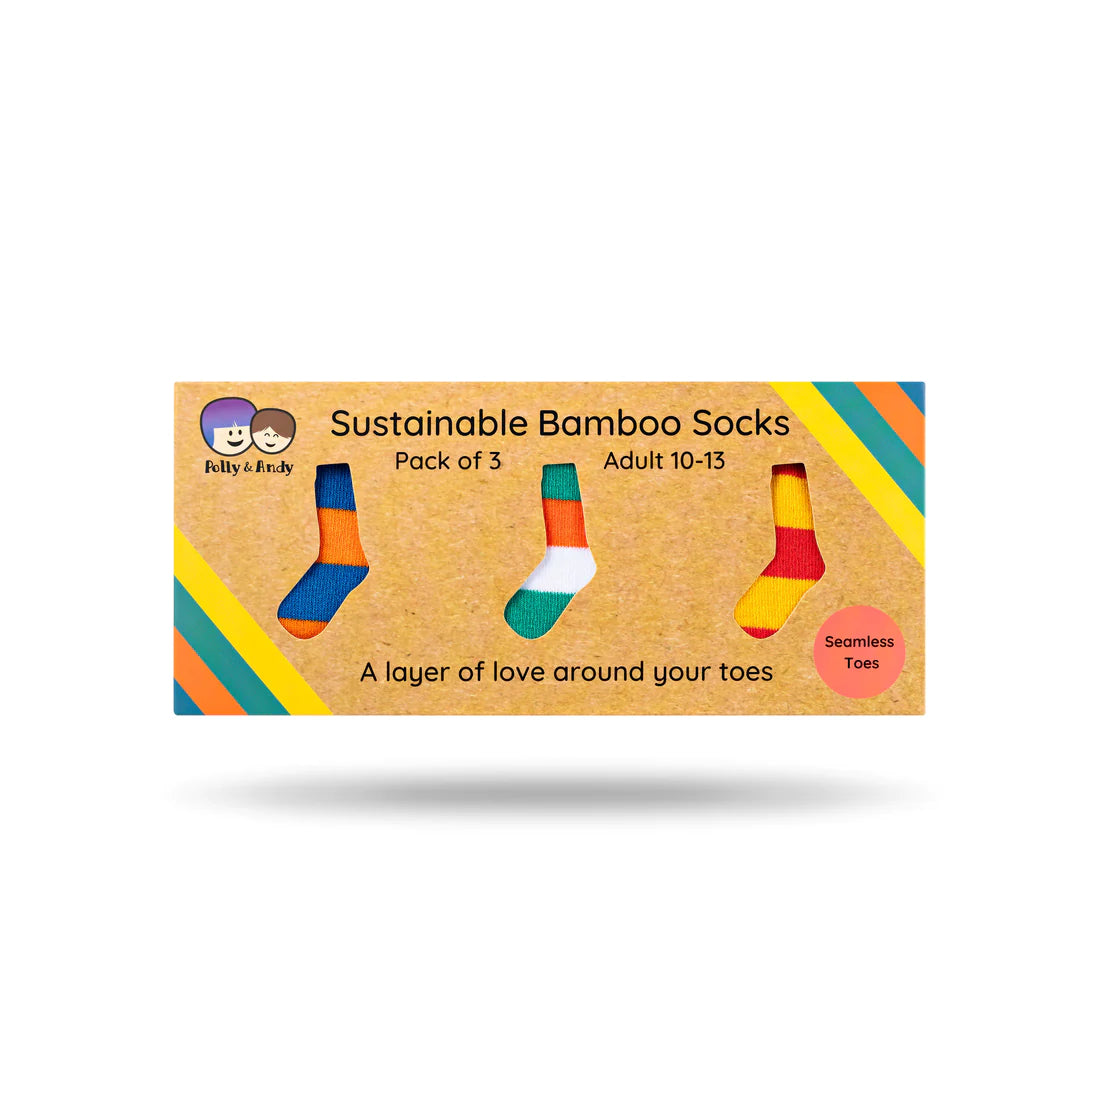 Polly & Andy Sustainable Bamboo Socks - Adult